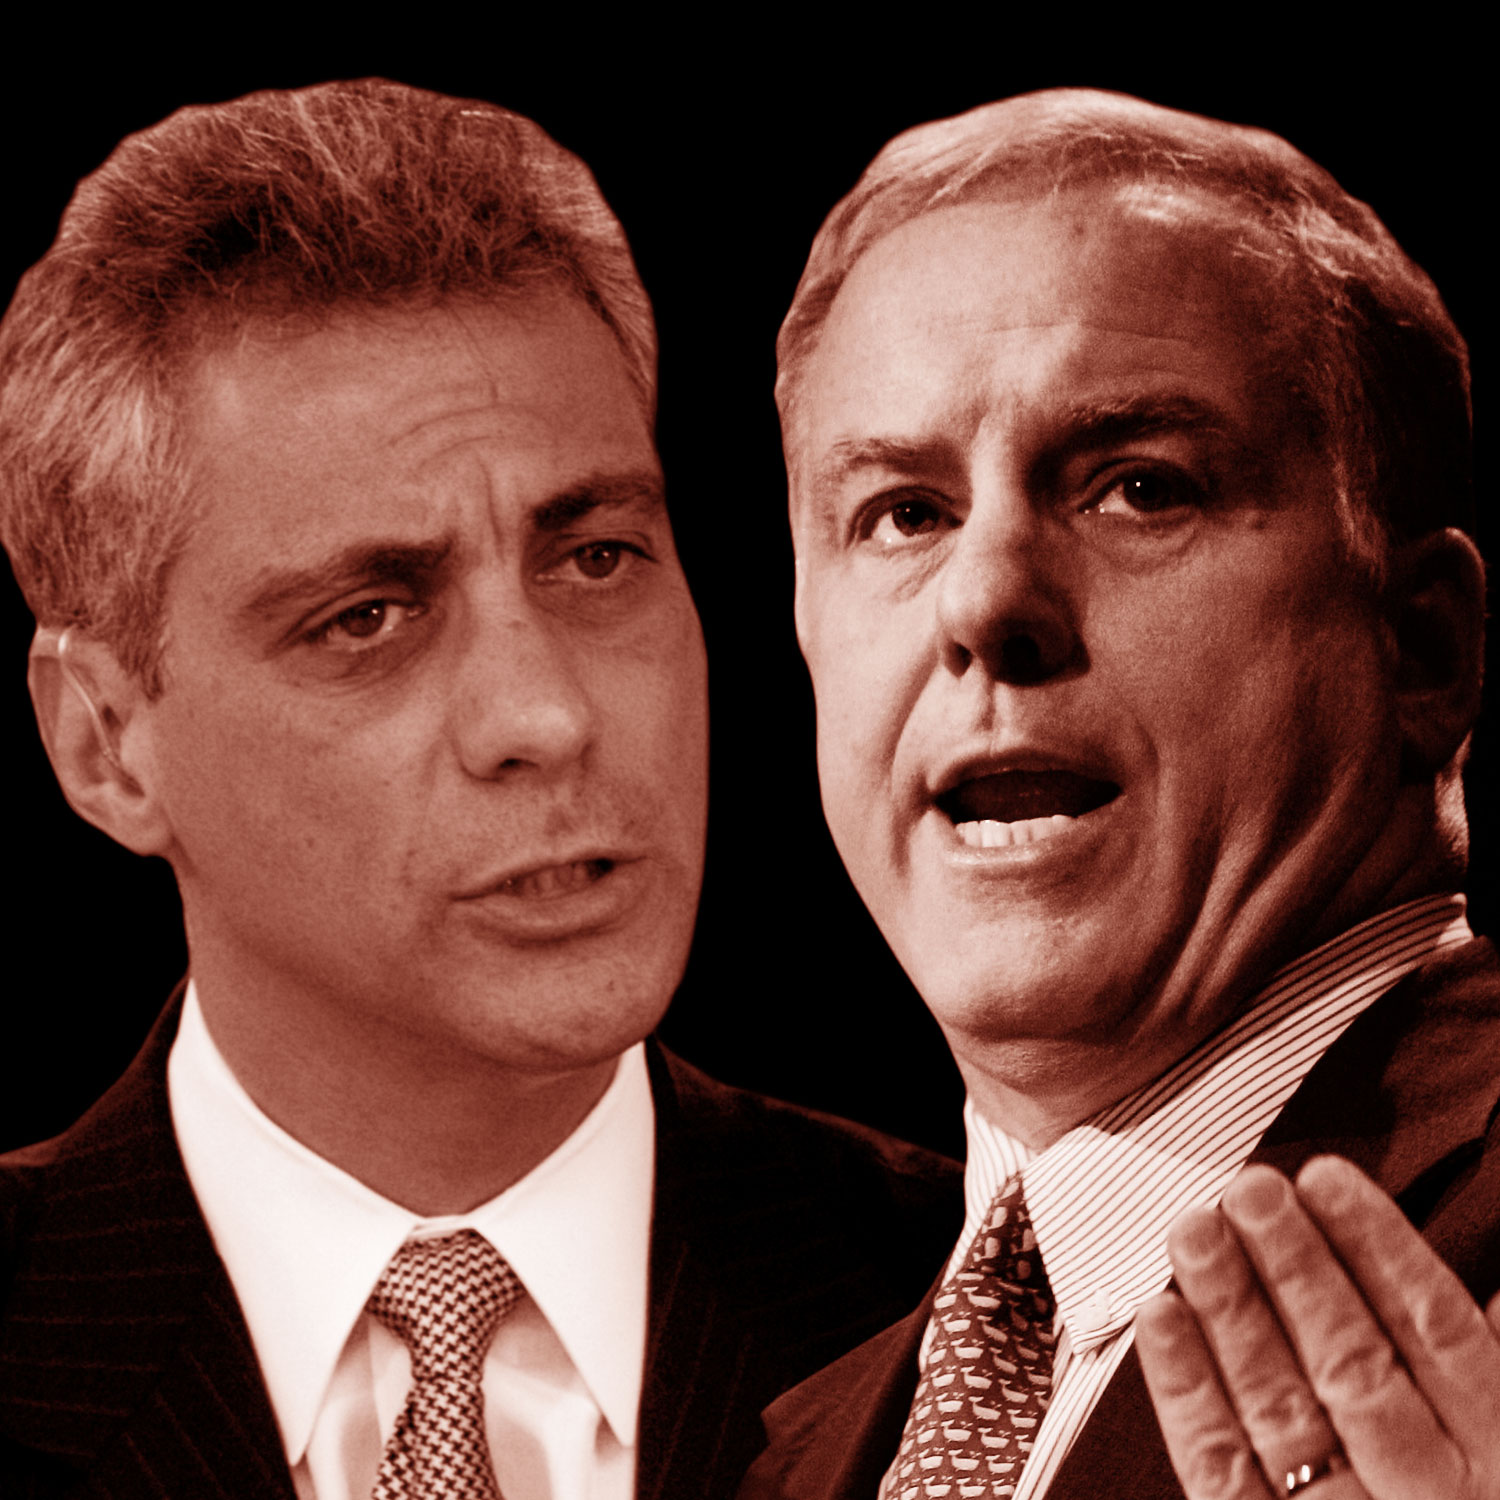 Rahm Emanuel, Howard Dean and the midterm elections of 2006